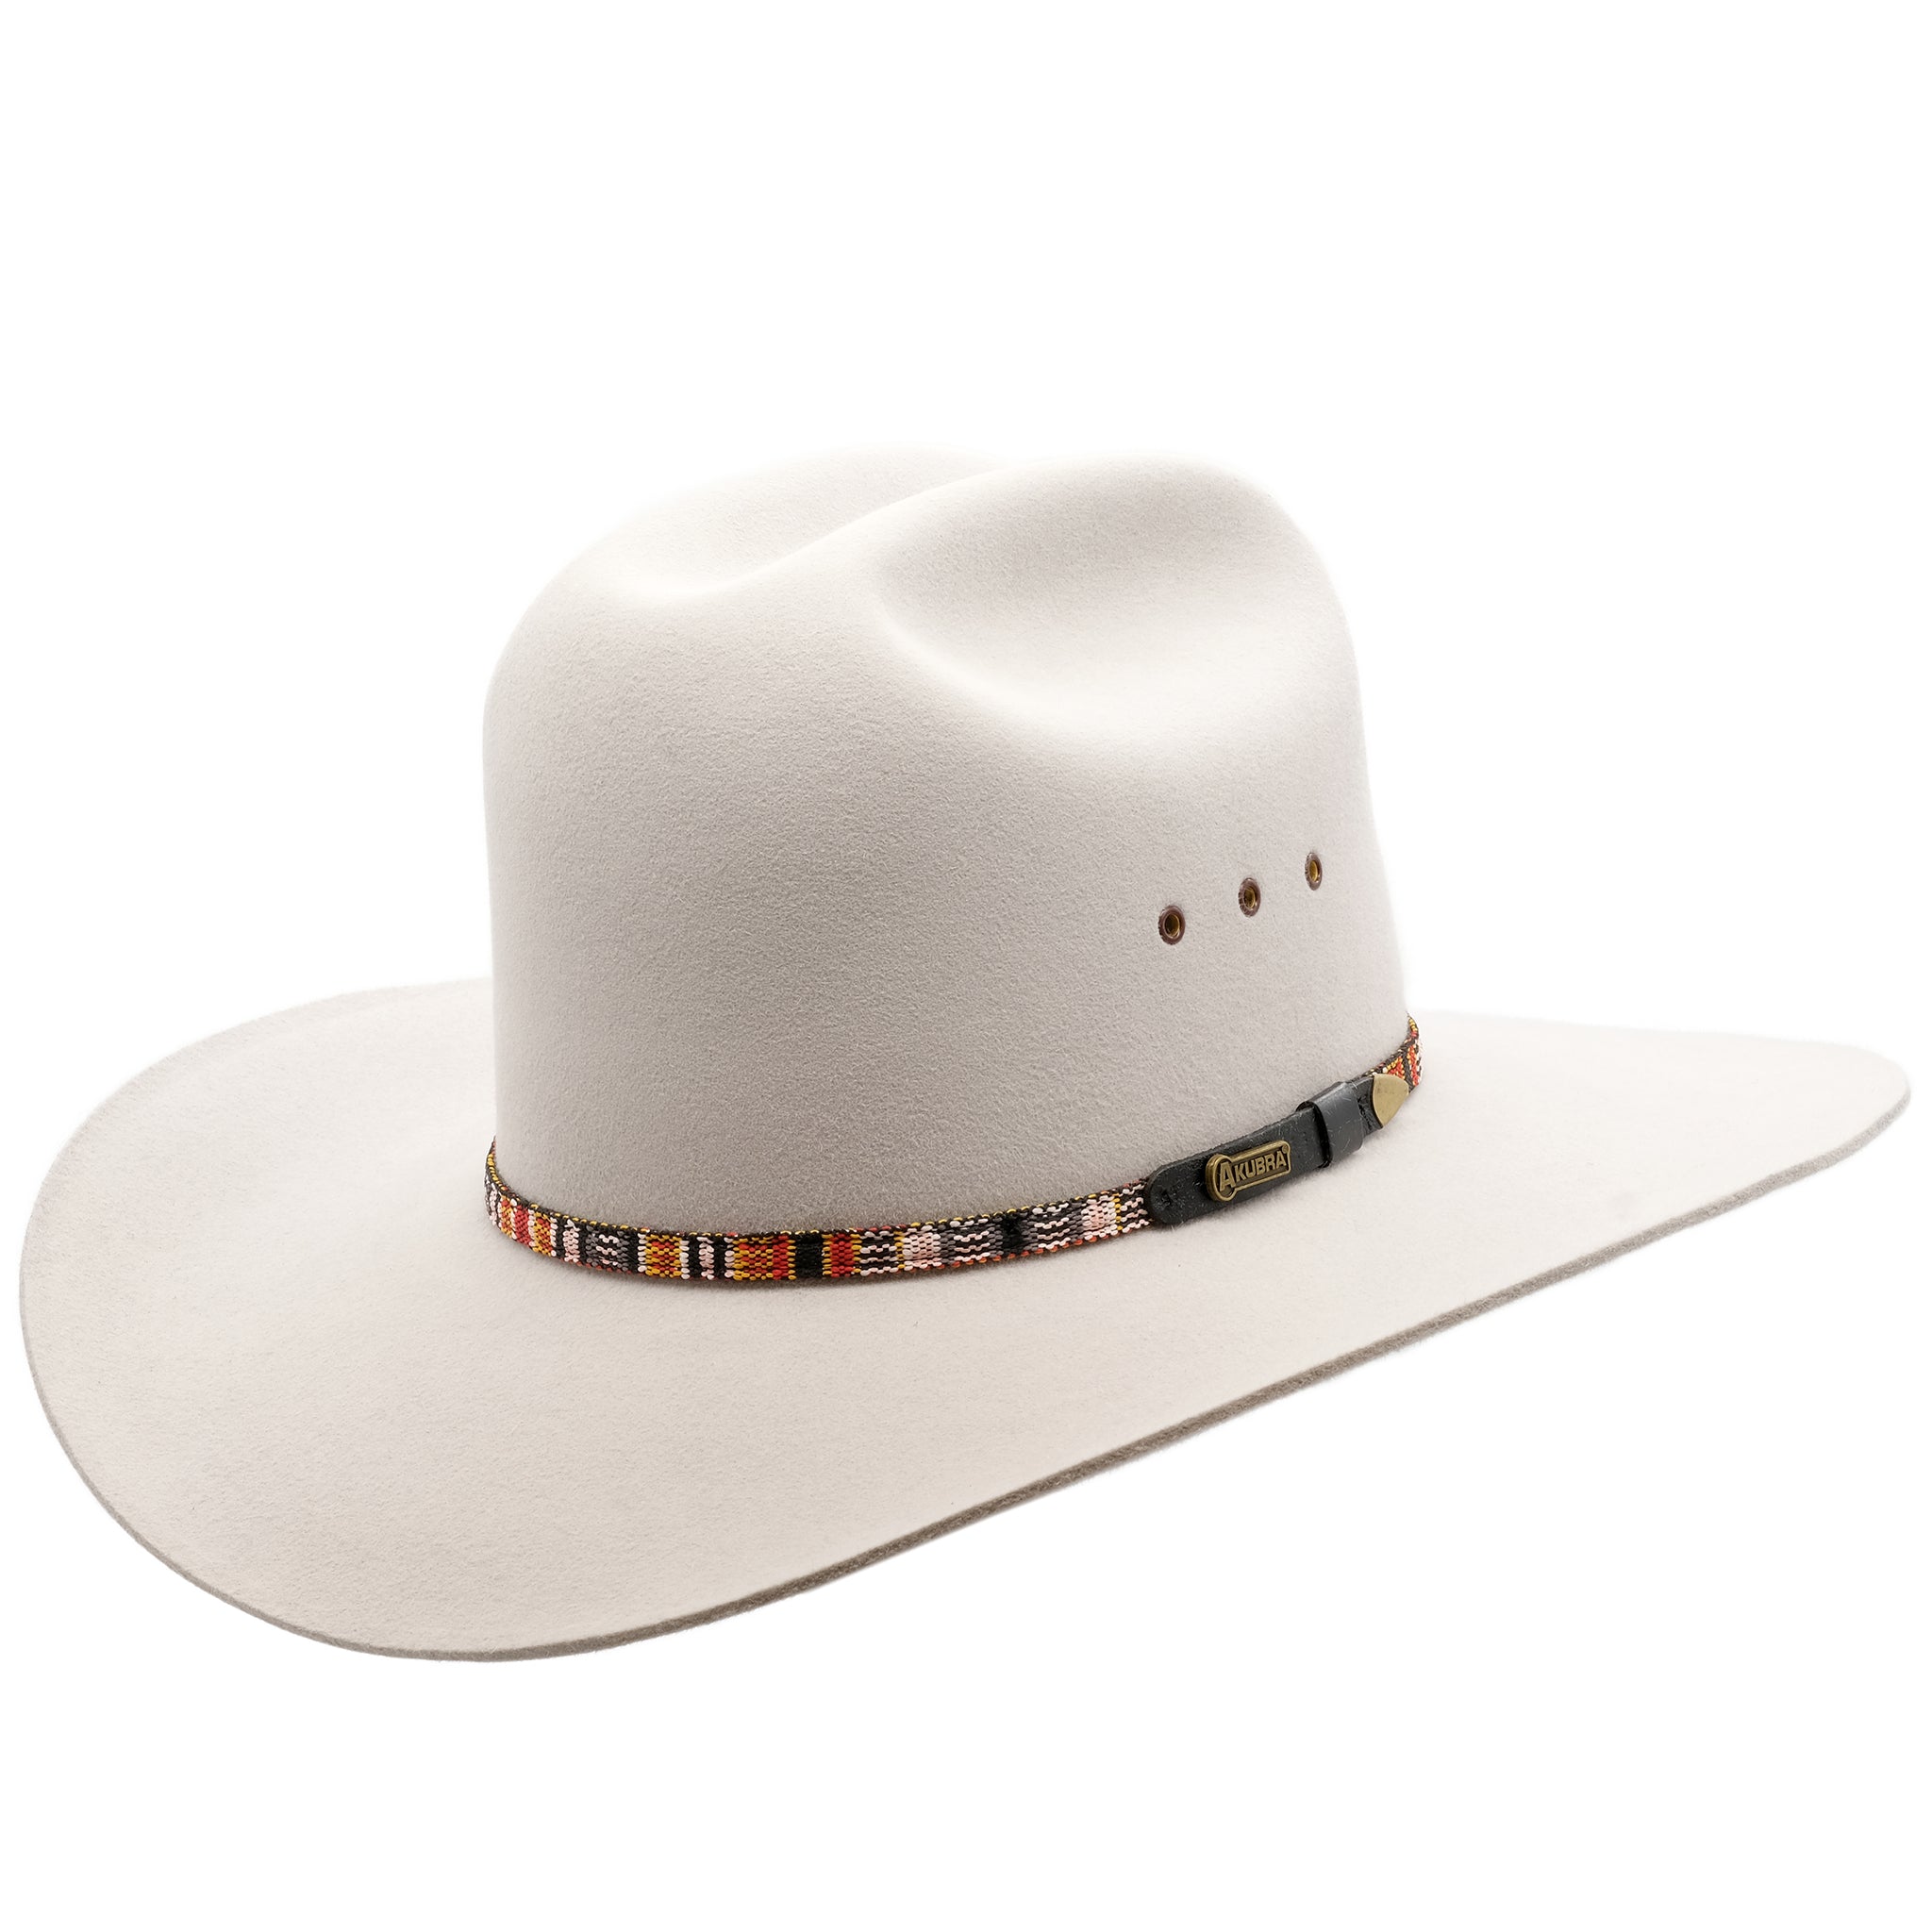 Angle view of the Akubra Bronco hat in Quartz colour